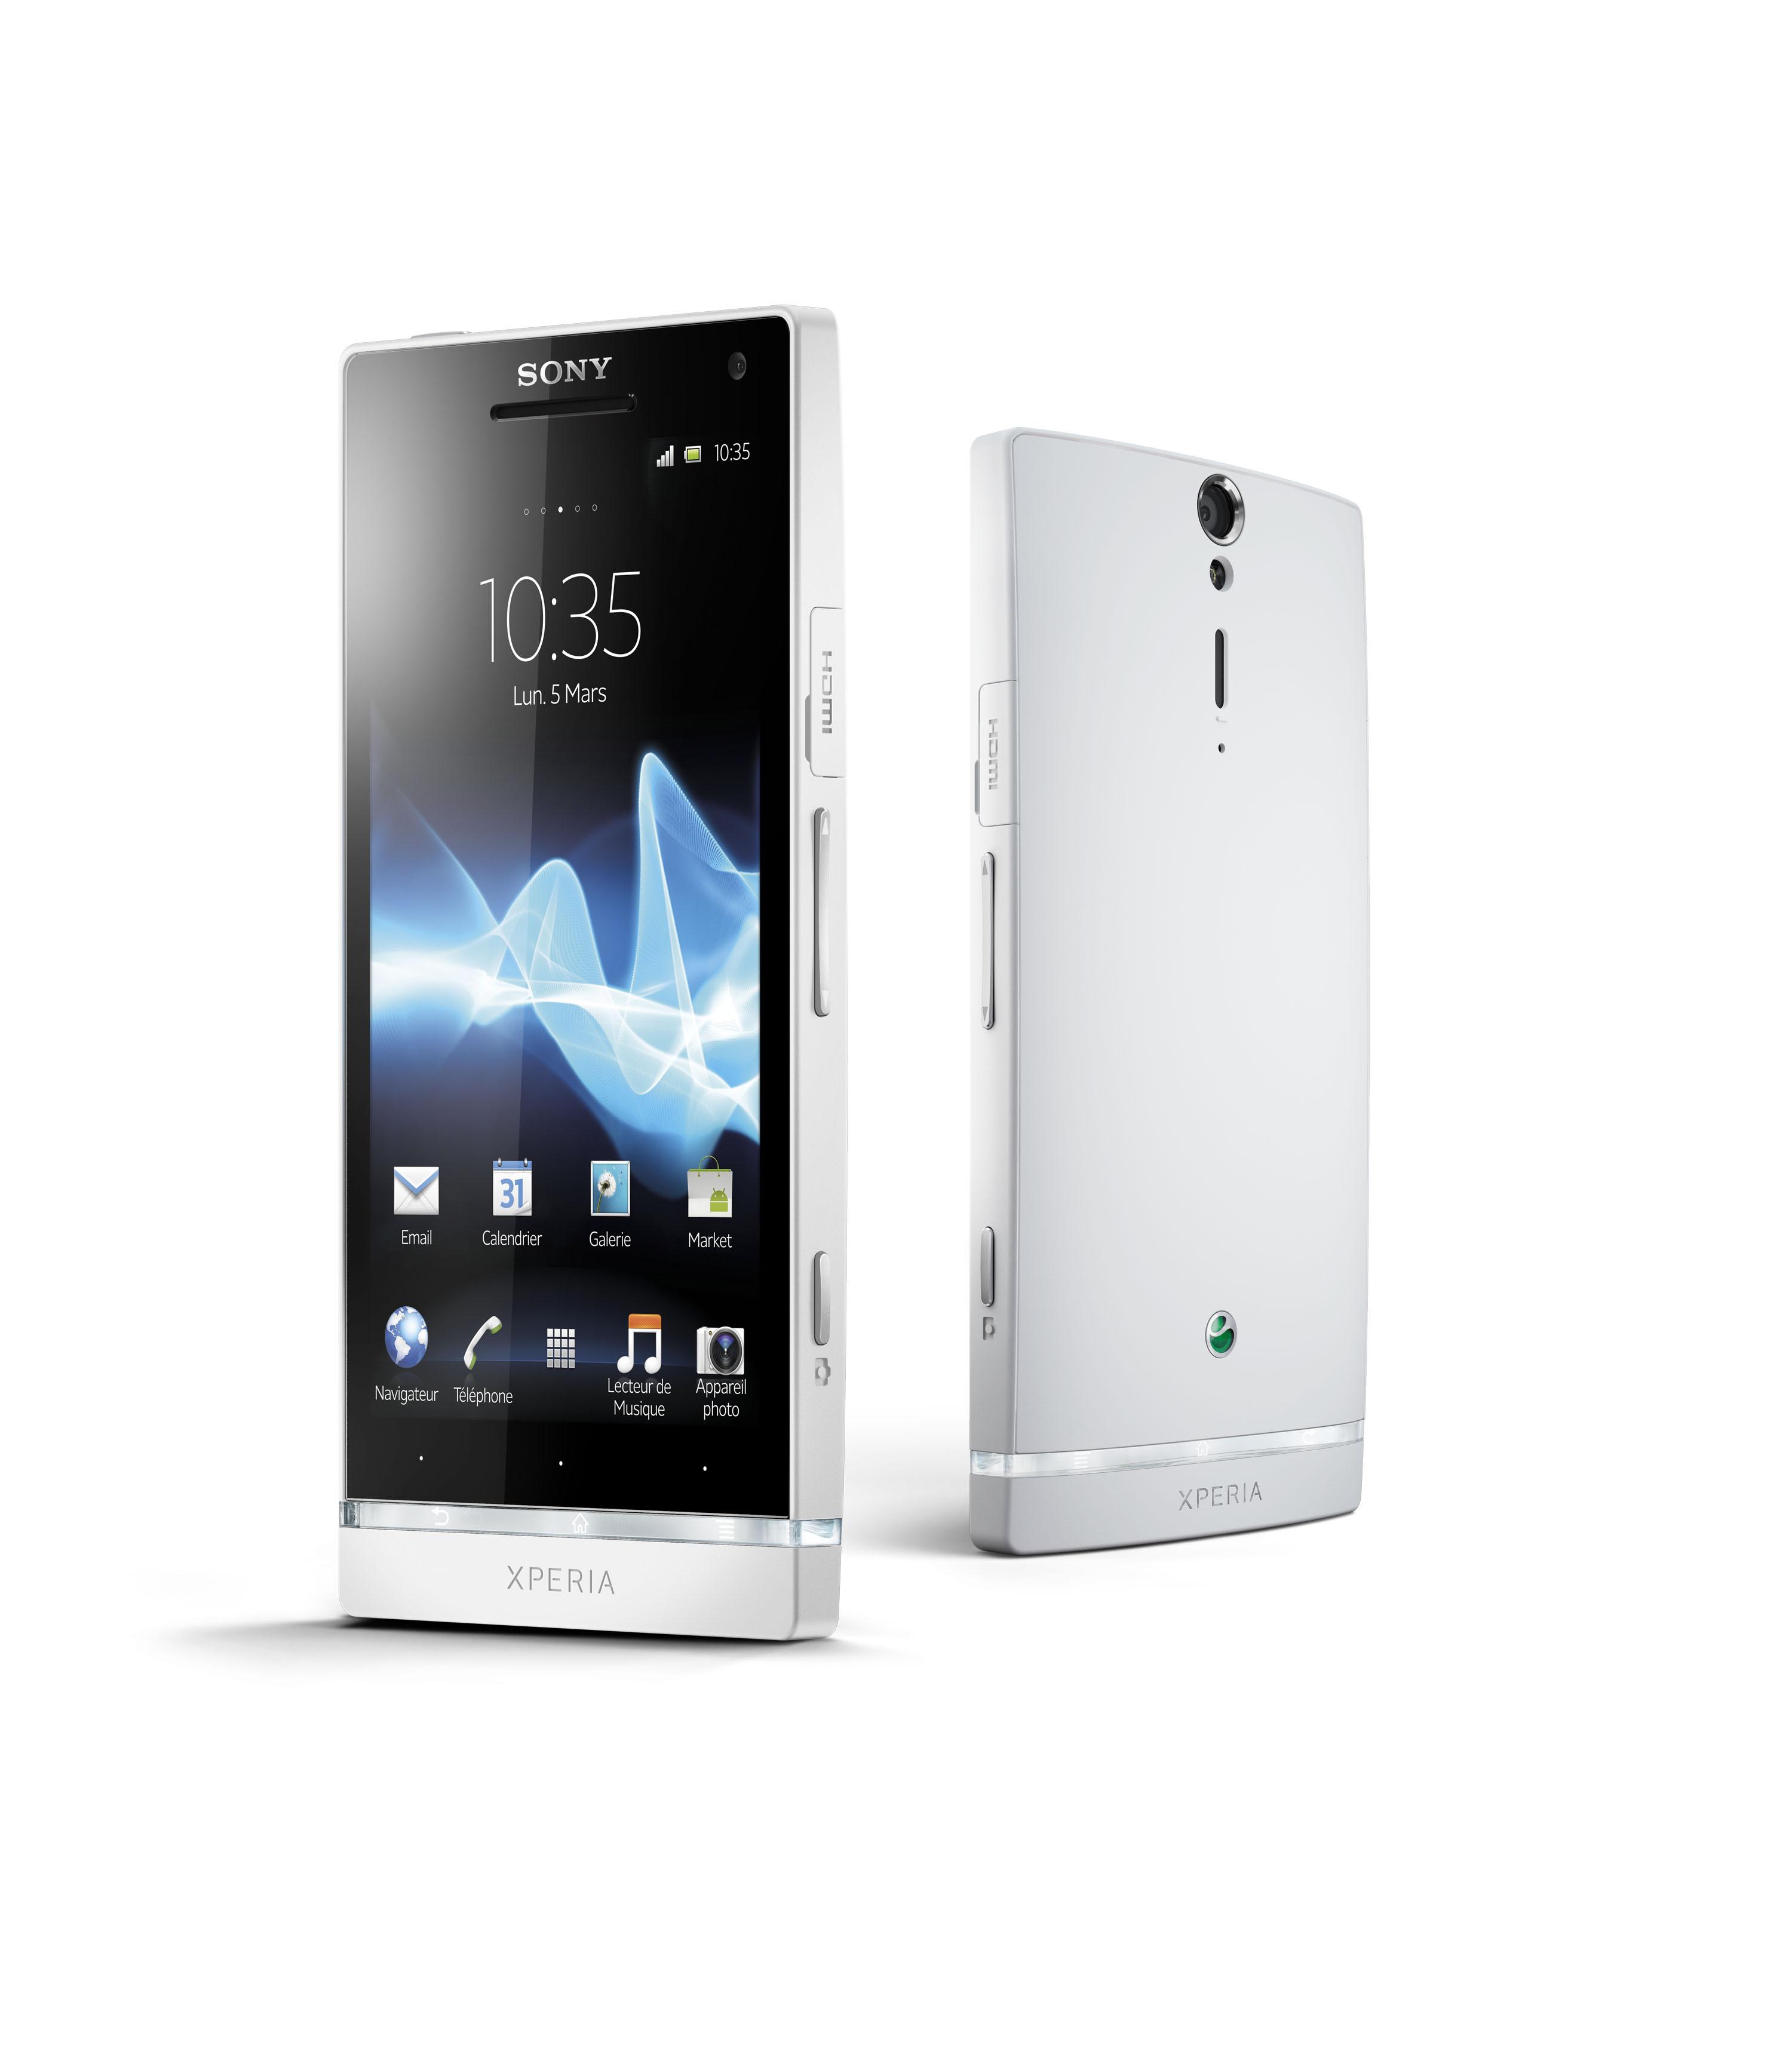 Le Sony Xperia S arrive